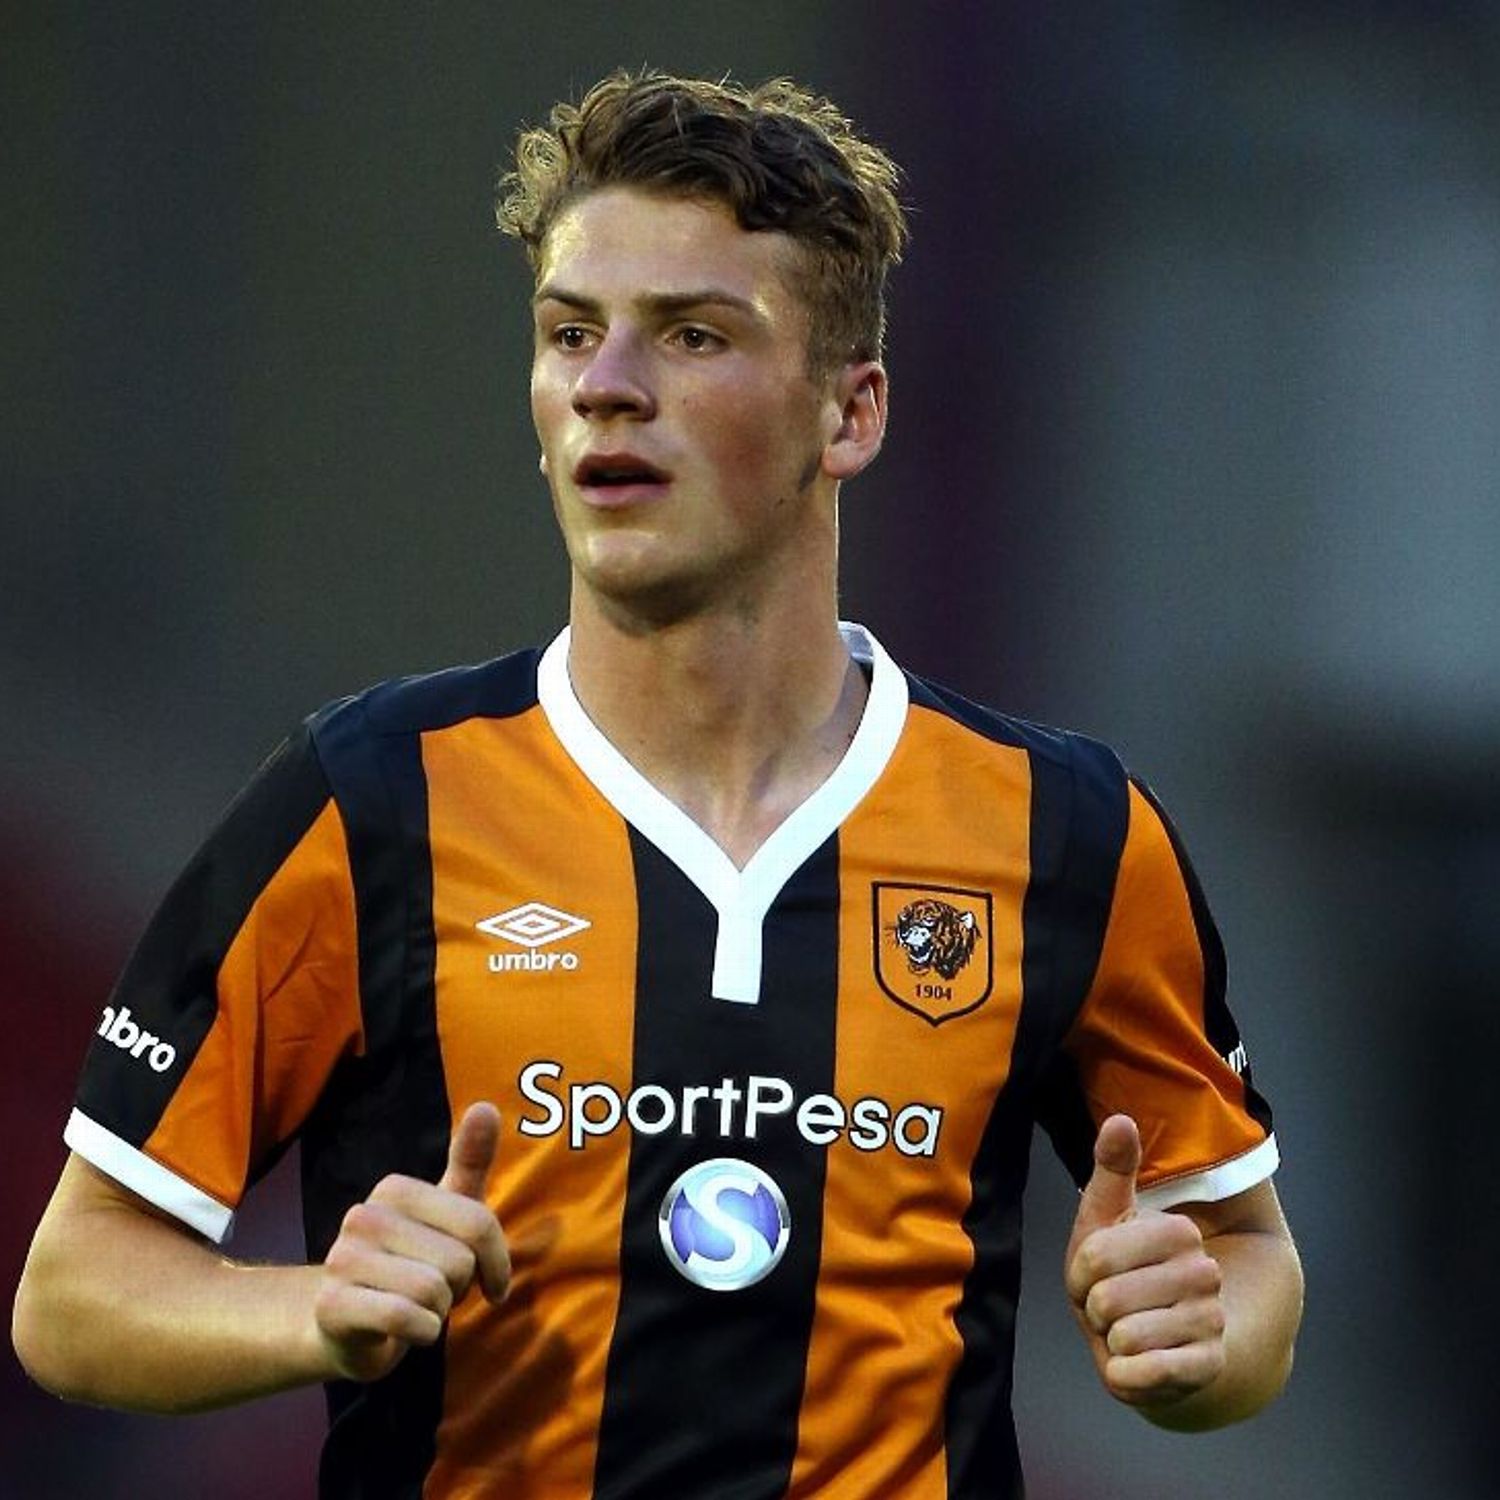 Liverpool tracking Hull's Tymon - sources - ESPN FC